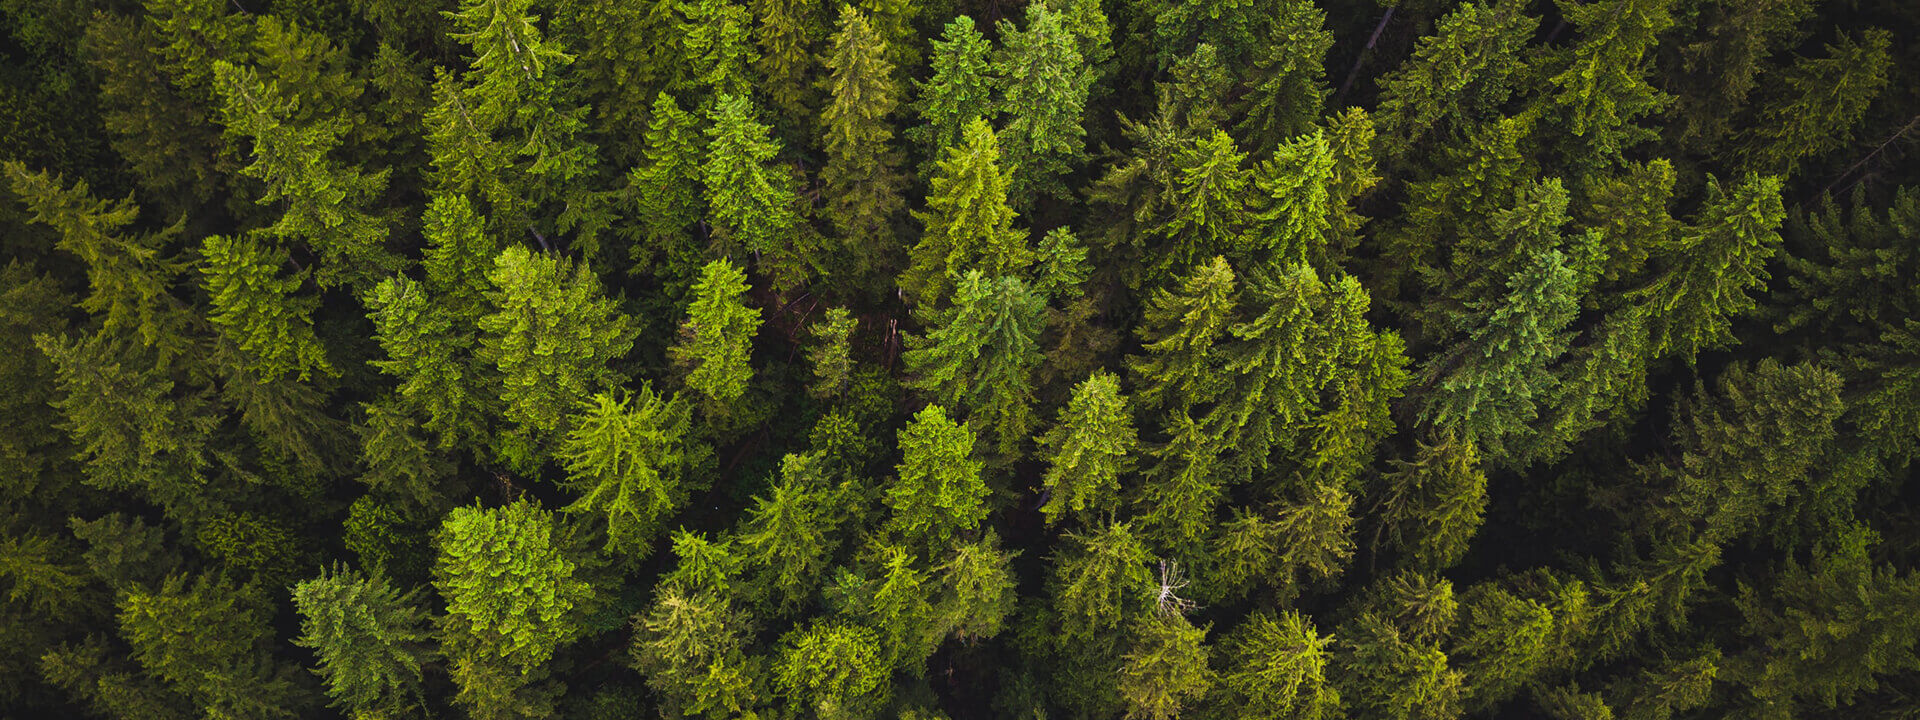 Arial shot of a green forest canopy